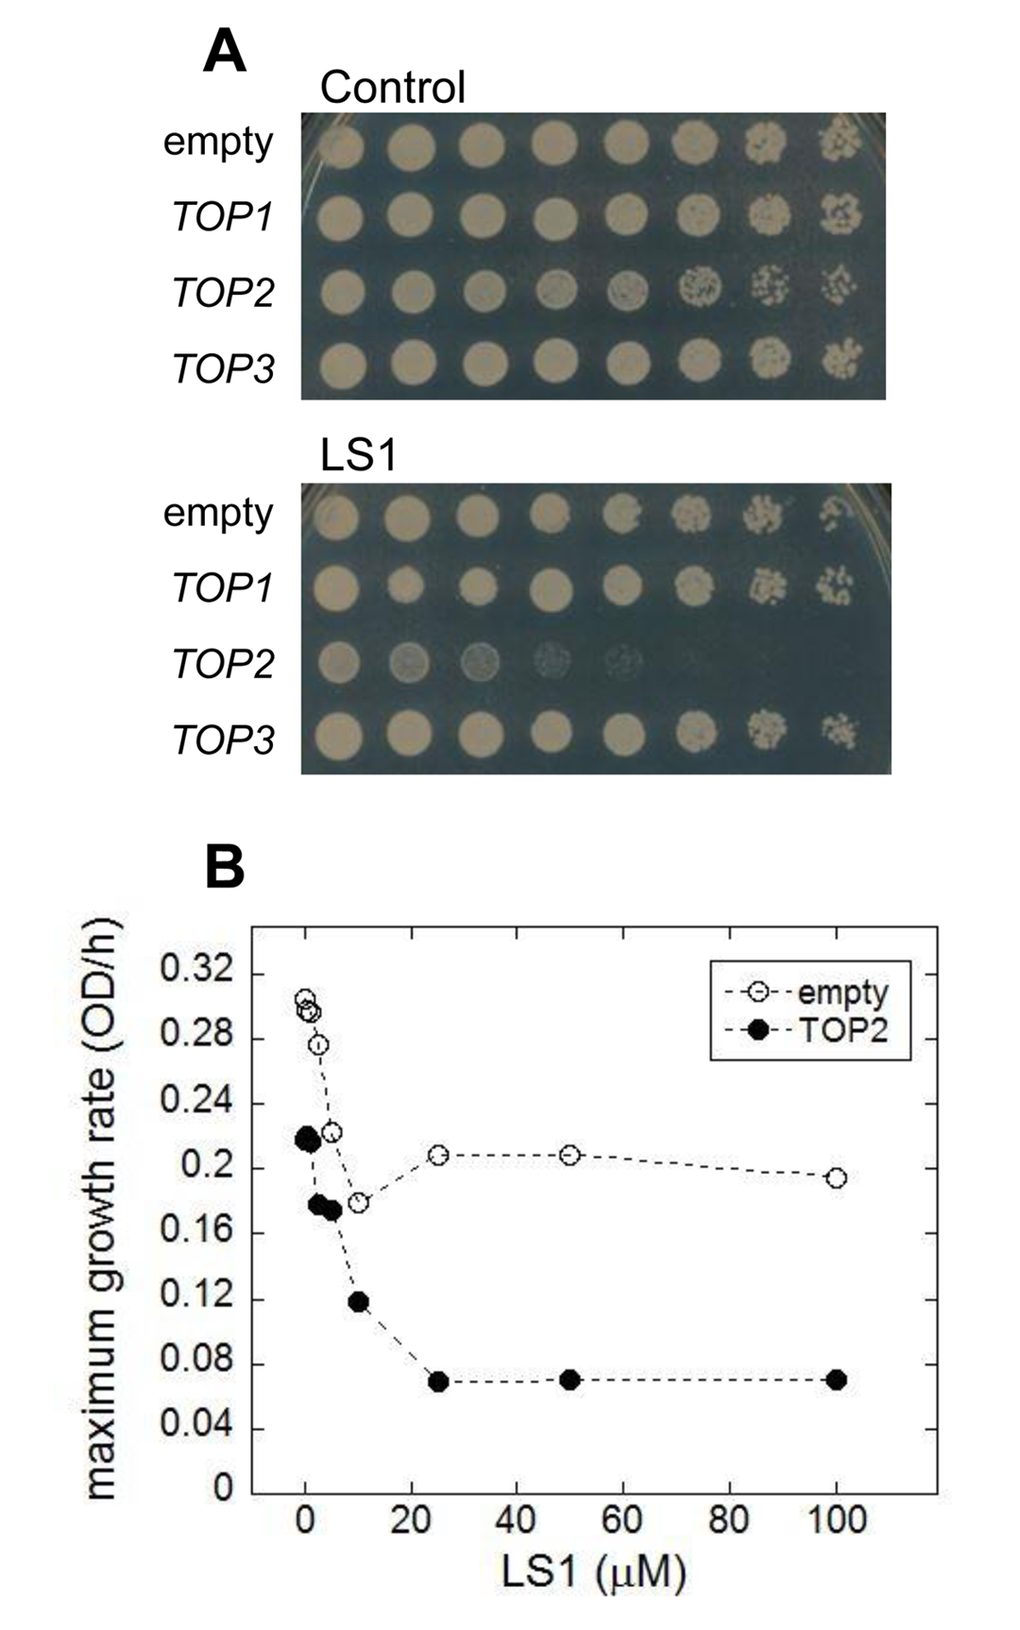 Overexpression of TOP2 confers hypersensitivity to LS1. (A) Effect of LS1 on BY4741 transformed with high copy number Yeast Tiling collection plasmids encoding TOP1, TOP2 or TOP3 (pTOP1, pTOP2, and pTOP3). Threefold-dilutions of log phase cells were patched onto YPD medium containing vehicle DMSO (control) or 10µM LS1. Overexpression of TOP2 was confirmed by quantitative western blot using secondary antibodies conjugated to infrared excitable fluorescent dyes and developed using the LI-COR fluorescent imaging system (not shown). (B) Quantitative effect of LS1 concentrations on growth of TOP2 overexpressing strain compared to cells containing the empty vector. Maximum growth rates were calculated from triplicate growth curves generated using a BioScreen C system and BGFit webserver as described in Materials & Methods.